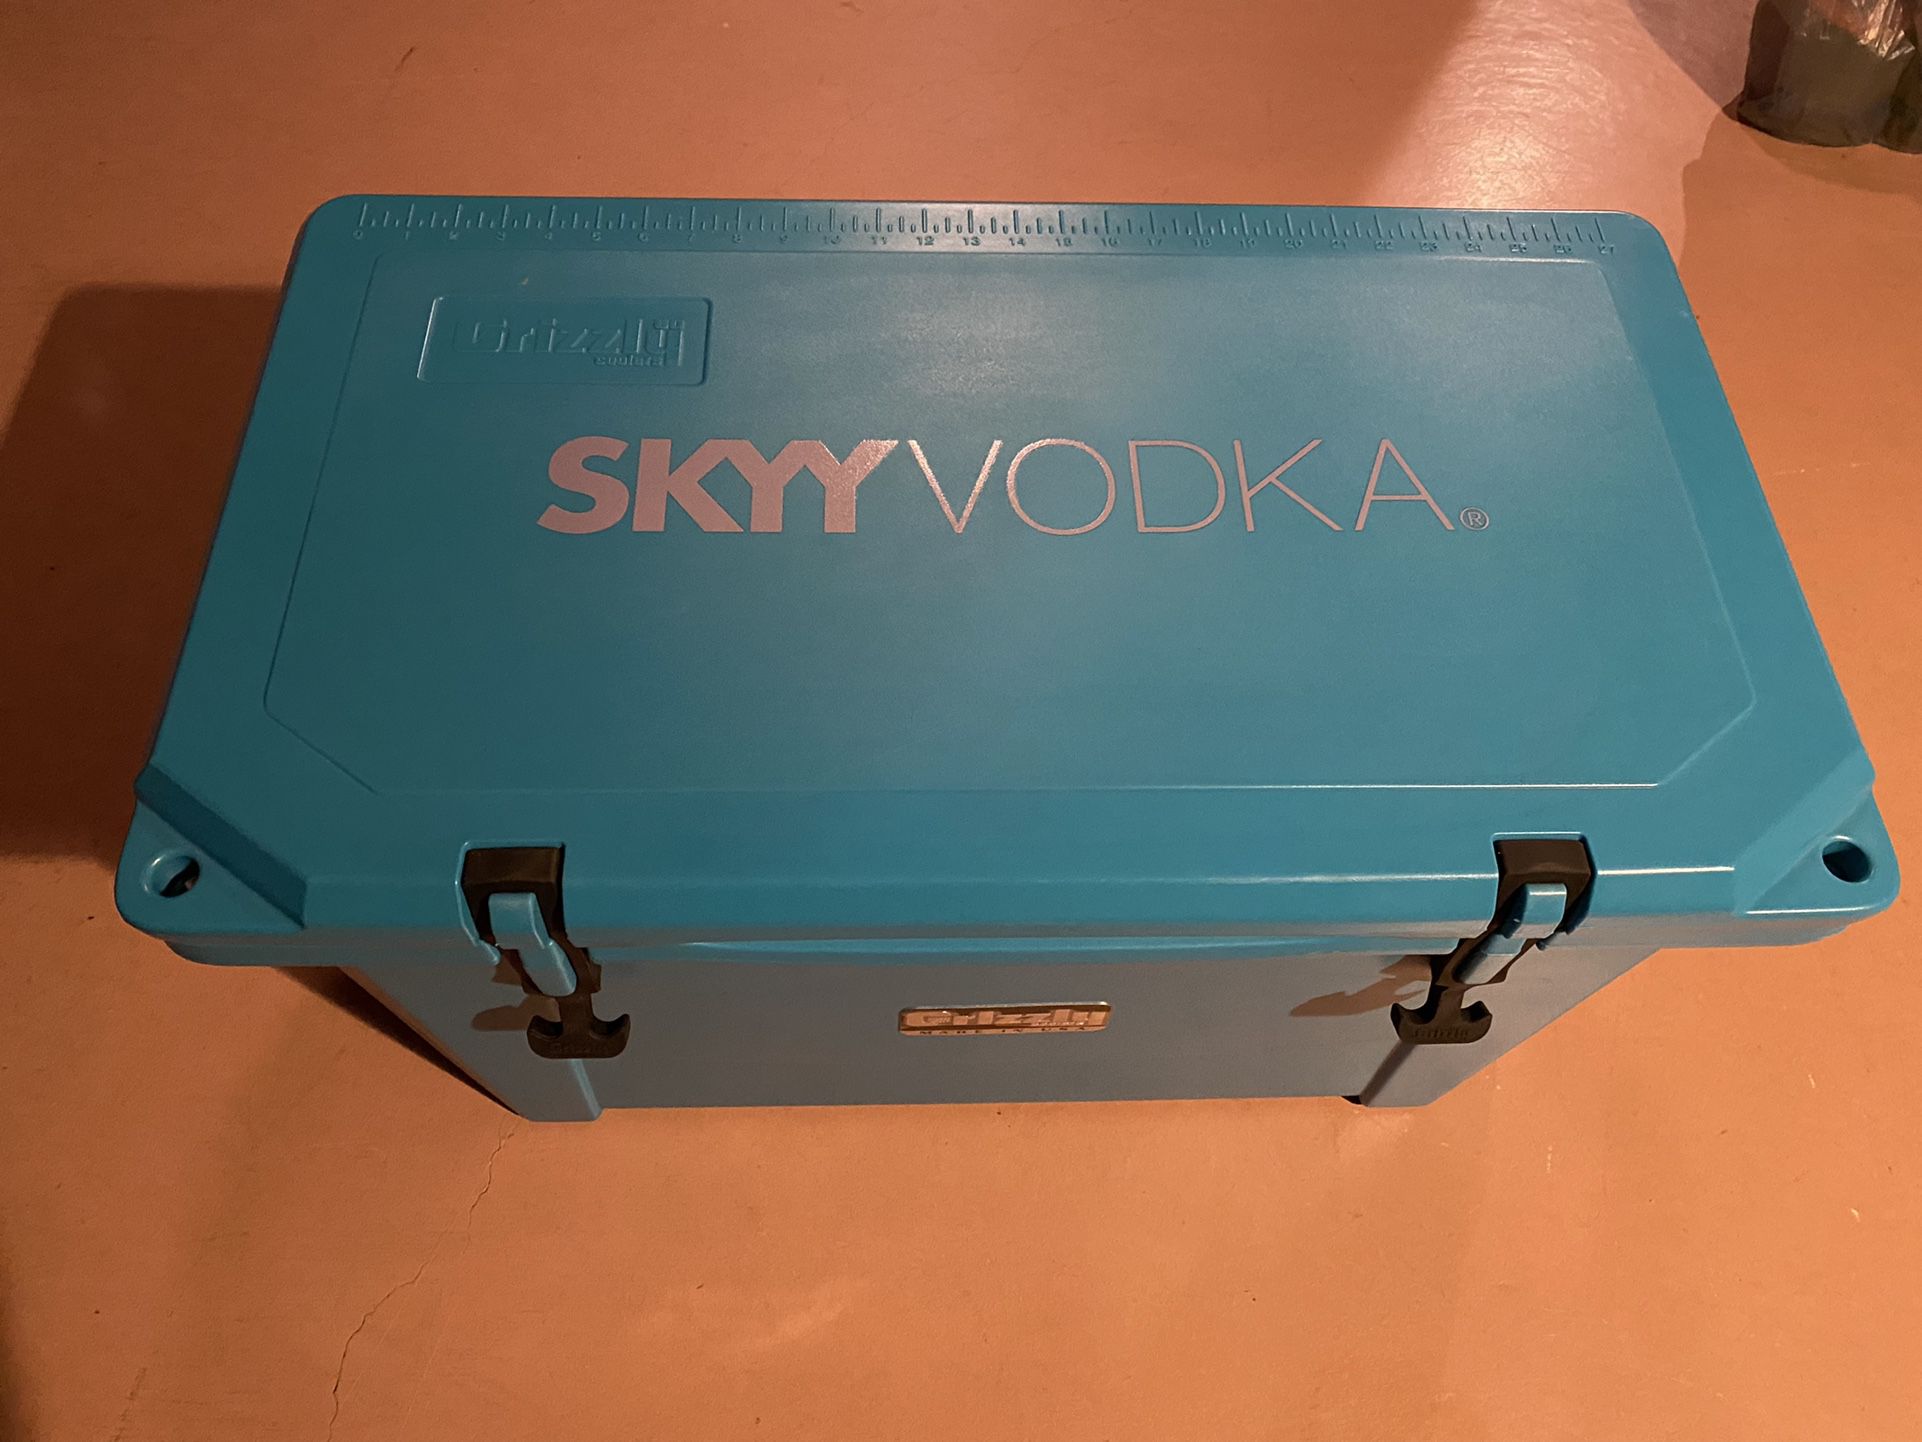 Grizzly 60 Cooler. Sky Vodka Blue edition